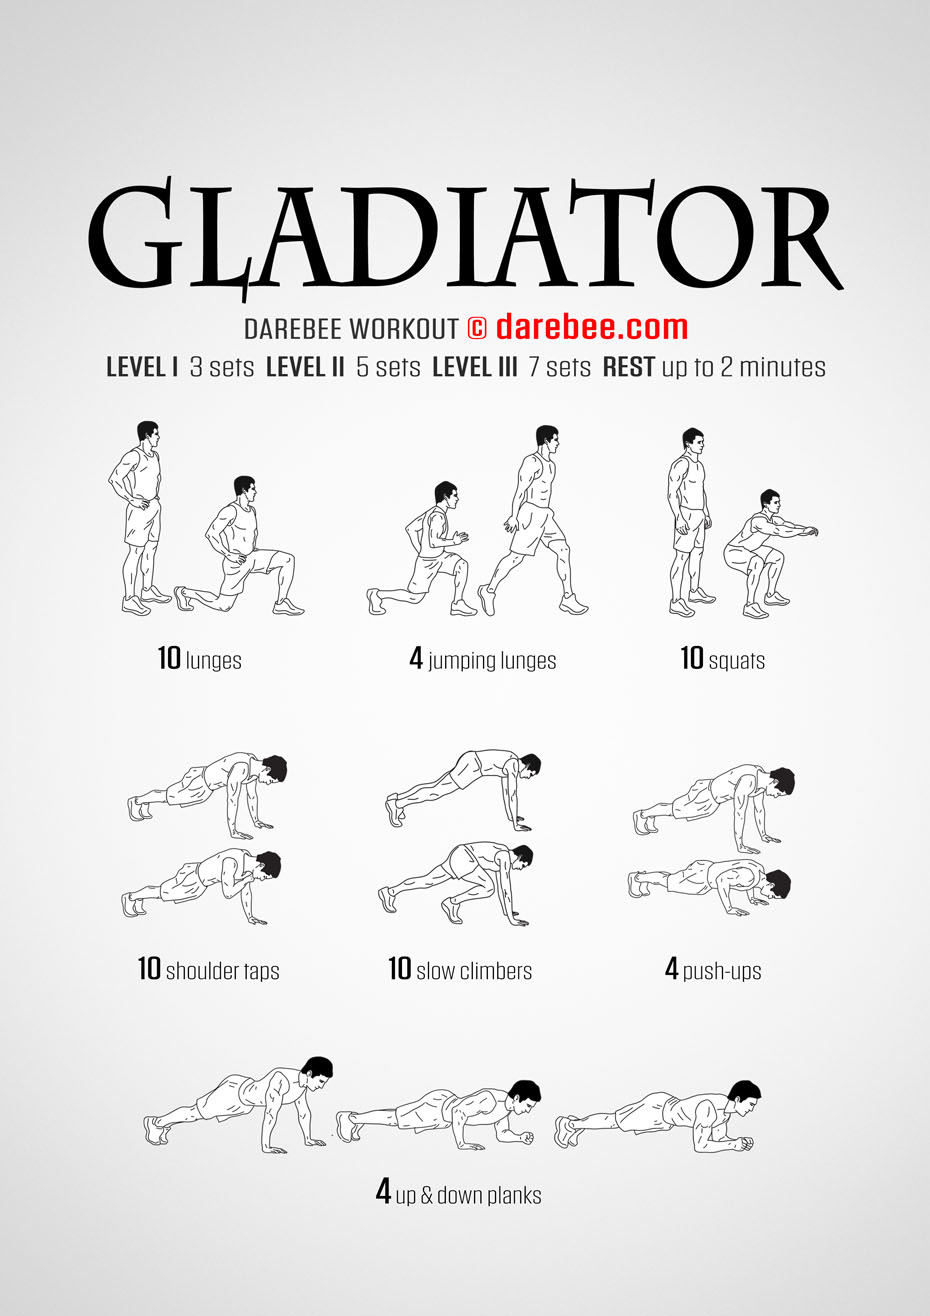 Gladiator workout is a DAREBEE home fitness, no-equipment total body strength workout you can do at home using just bodyweight exercises in a particular order.